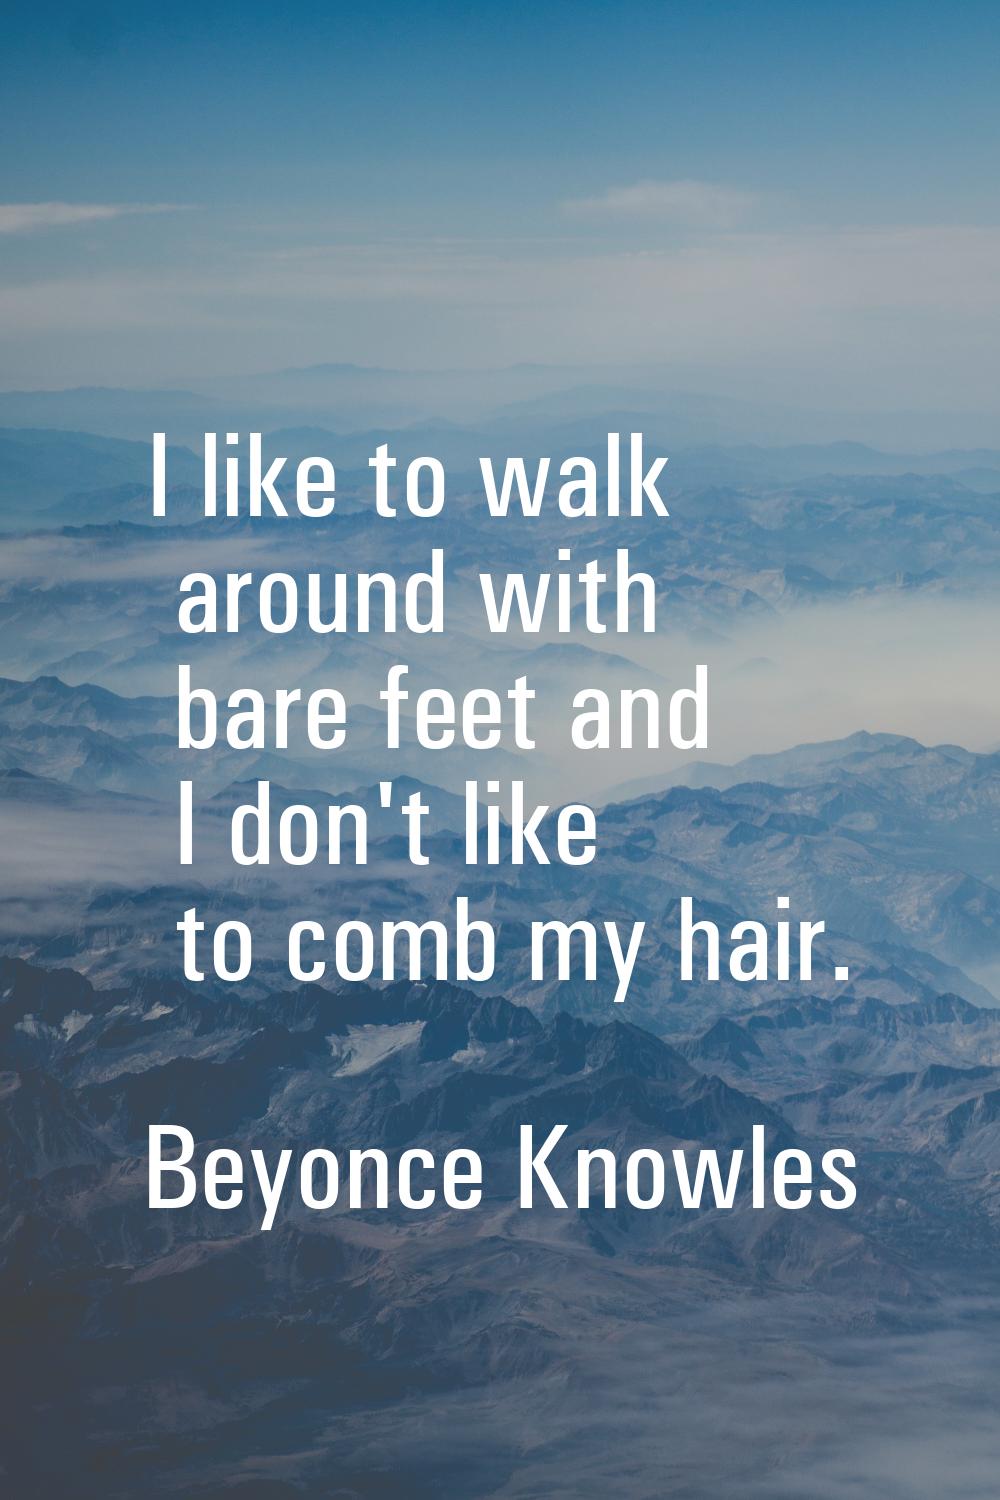 I like to walk around with bare feet and I don't like to comb my hair.